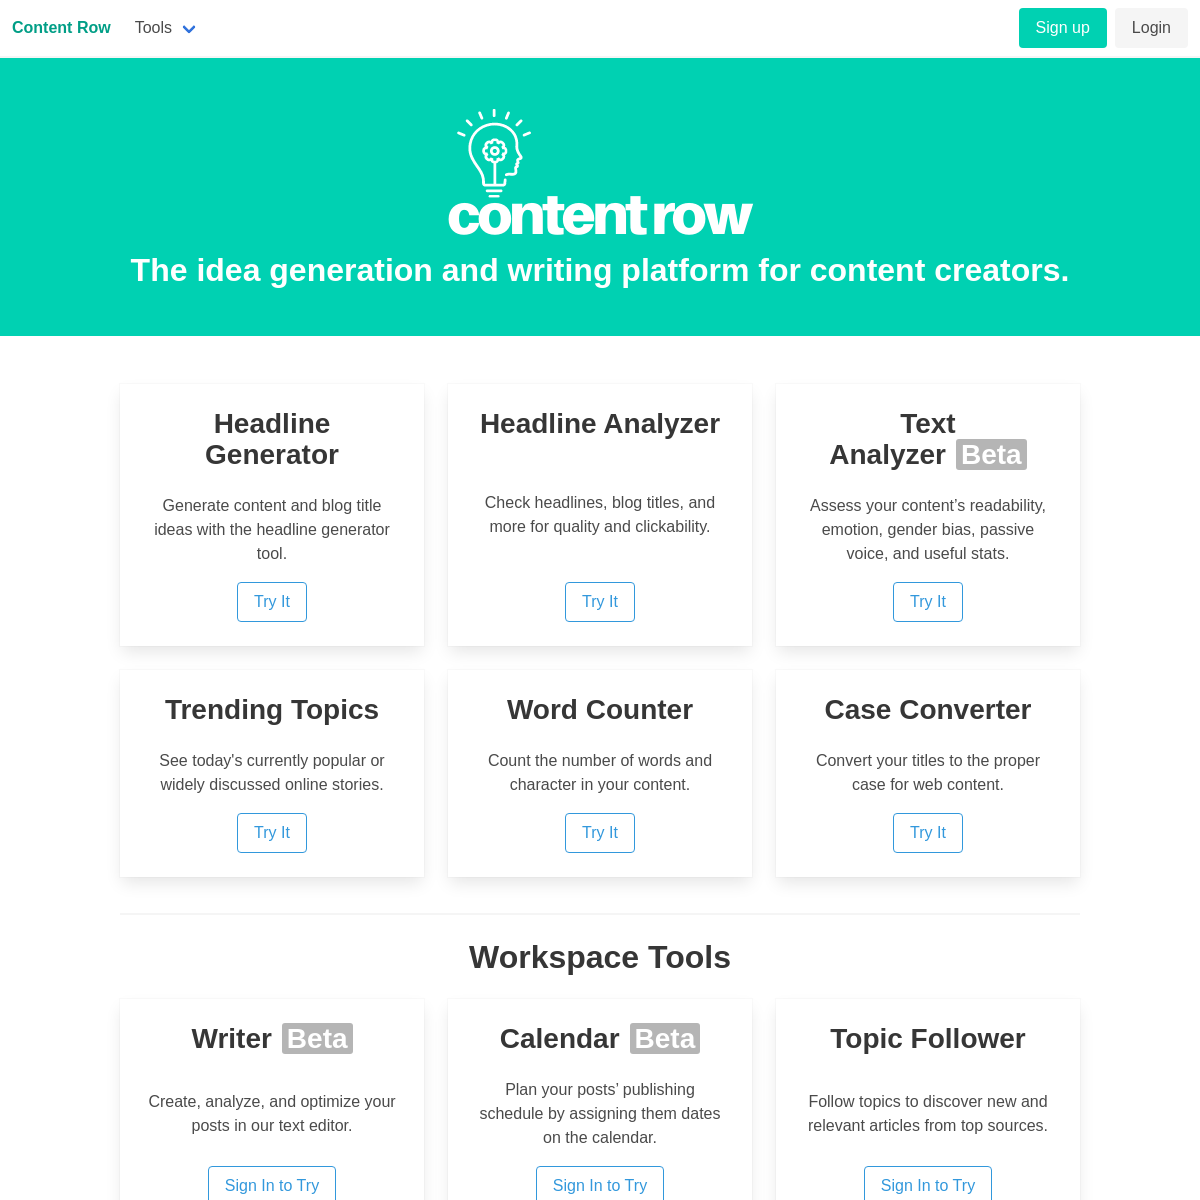 A complete backup of contentrow.com